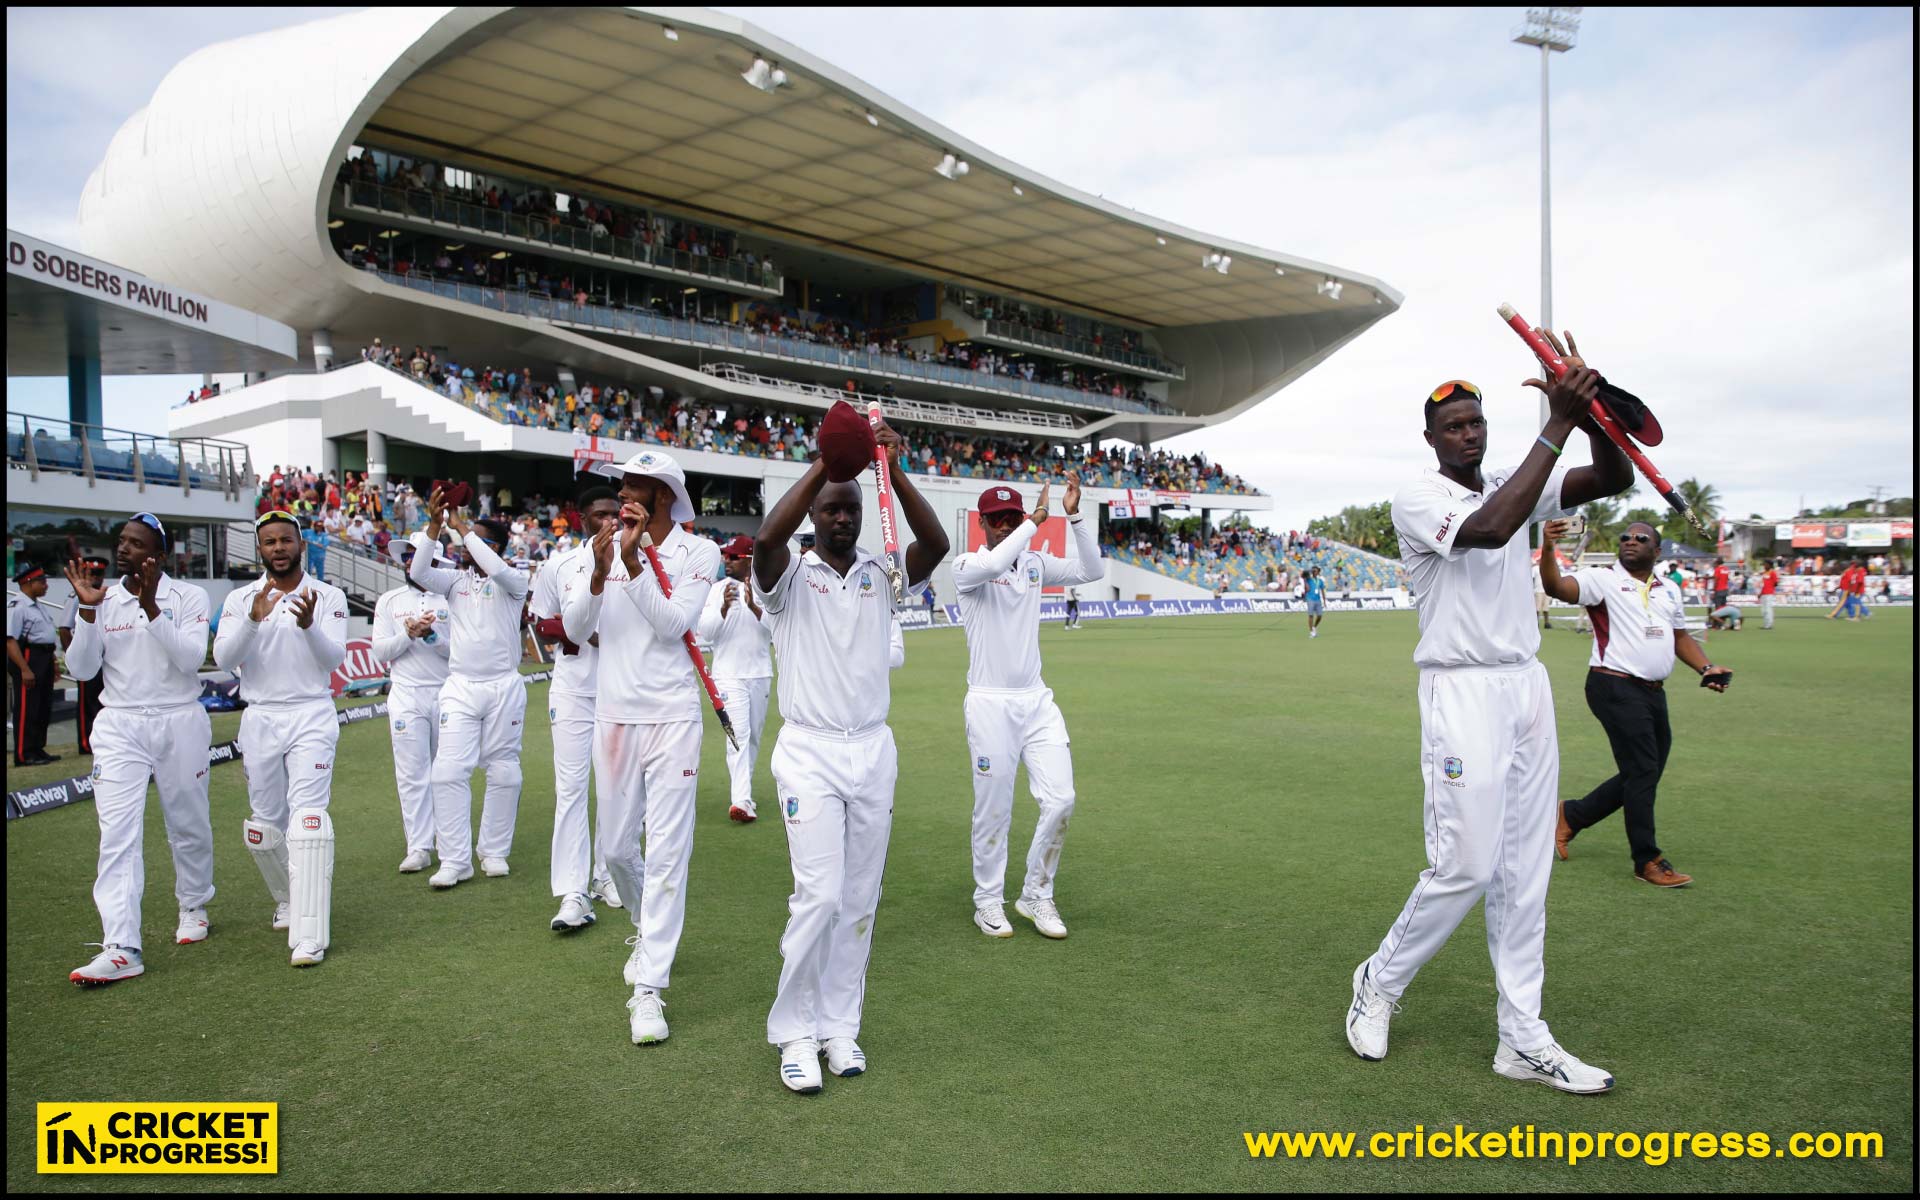 The Rise of Windies - A Case Study